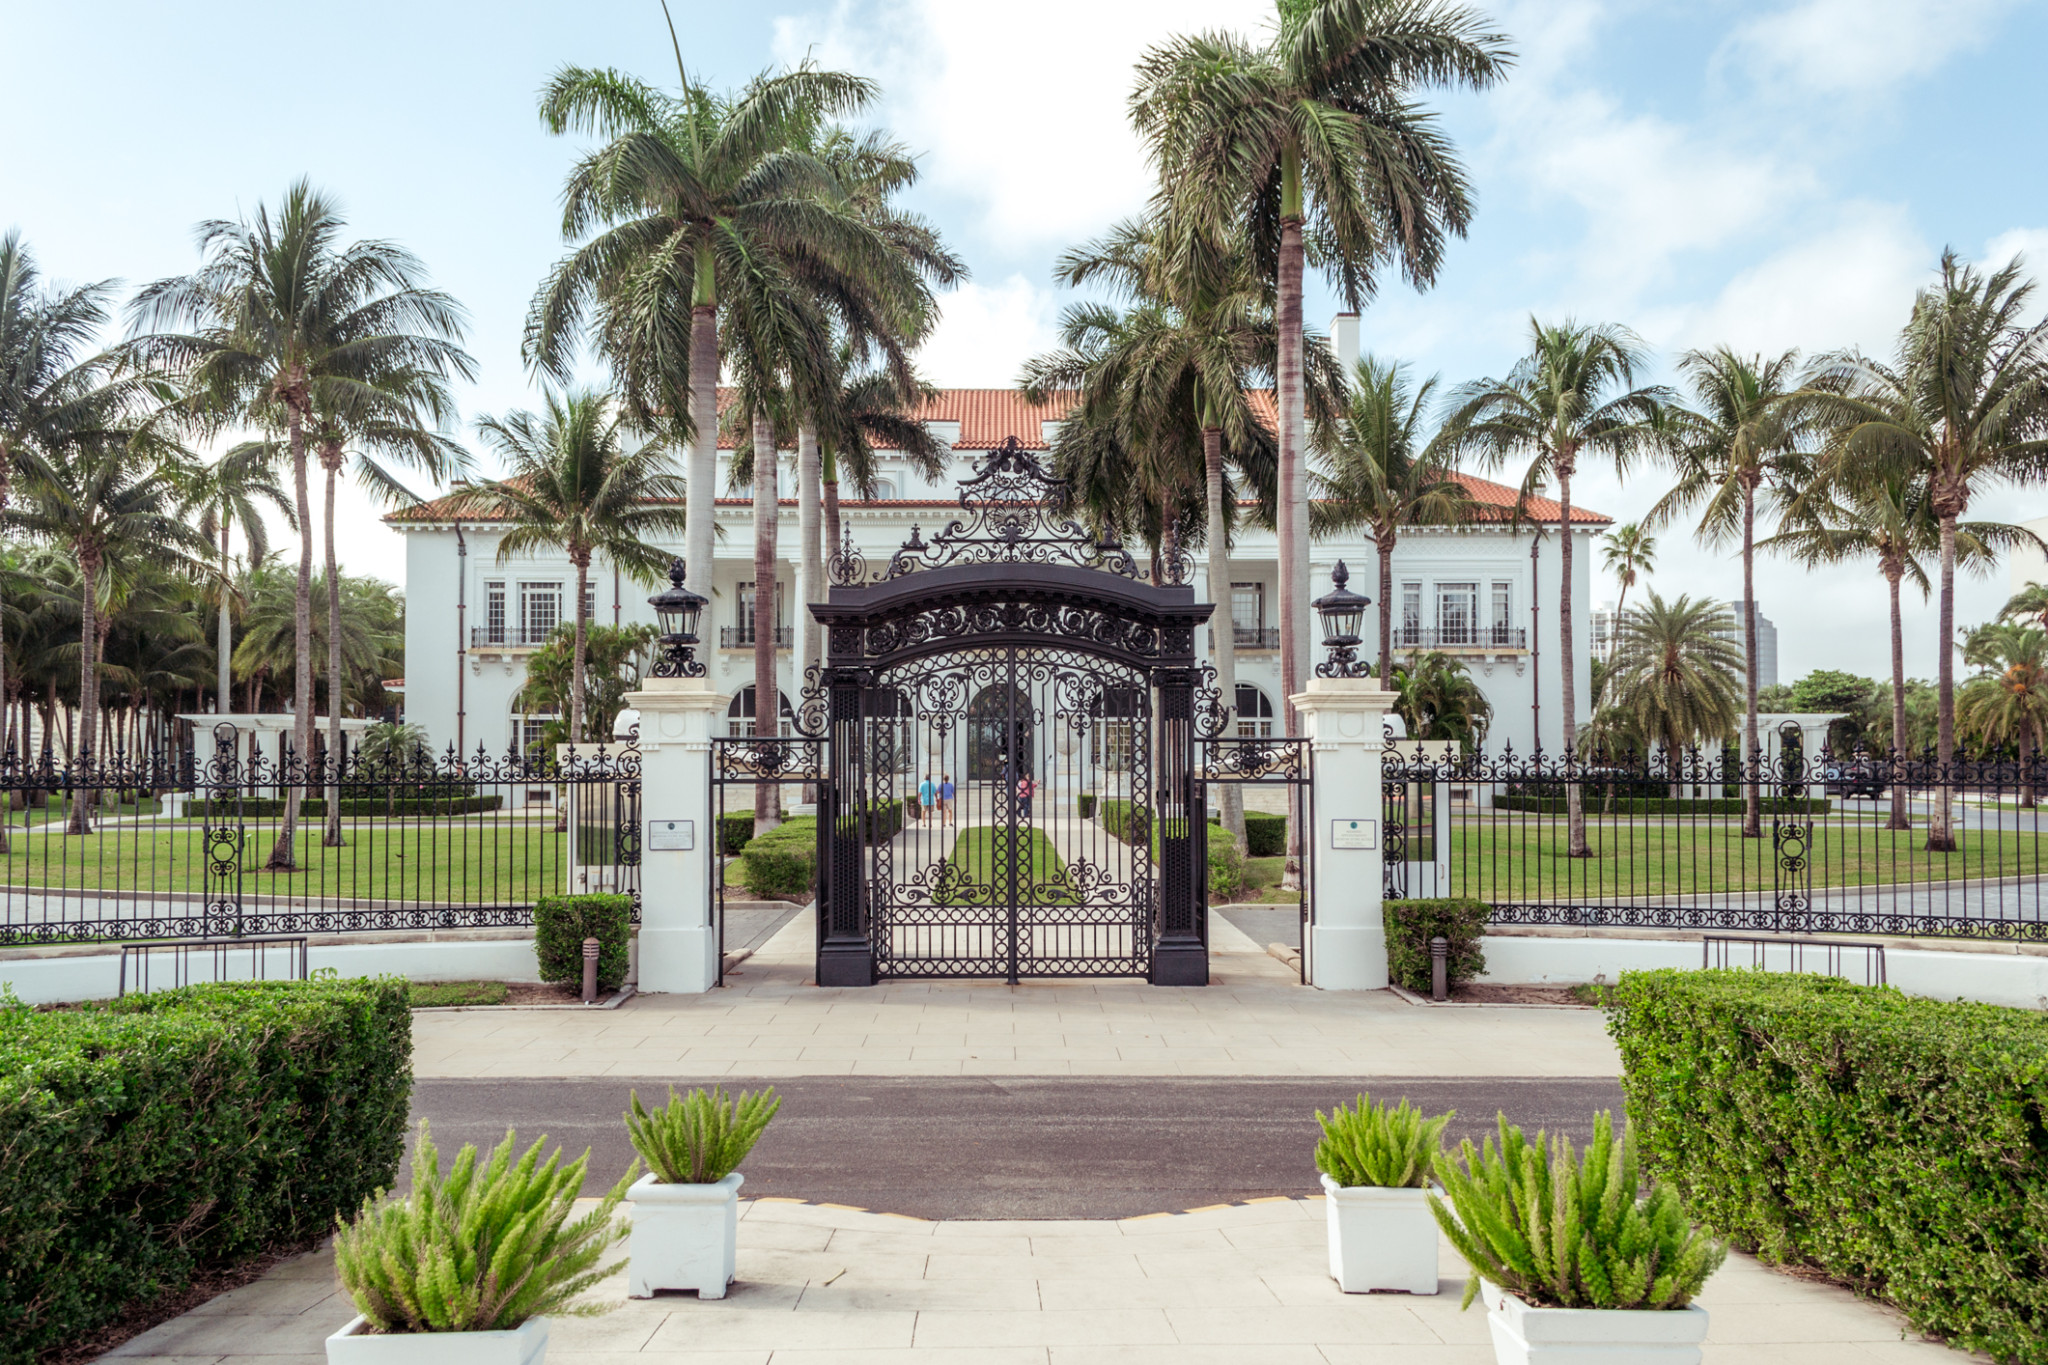 The outside of the Henry Morrison Flagler Museum in Palm Beach.